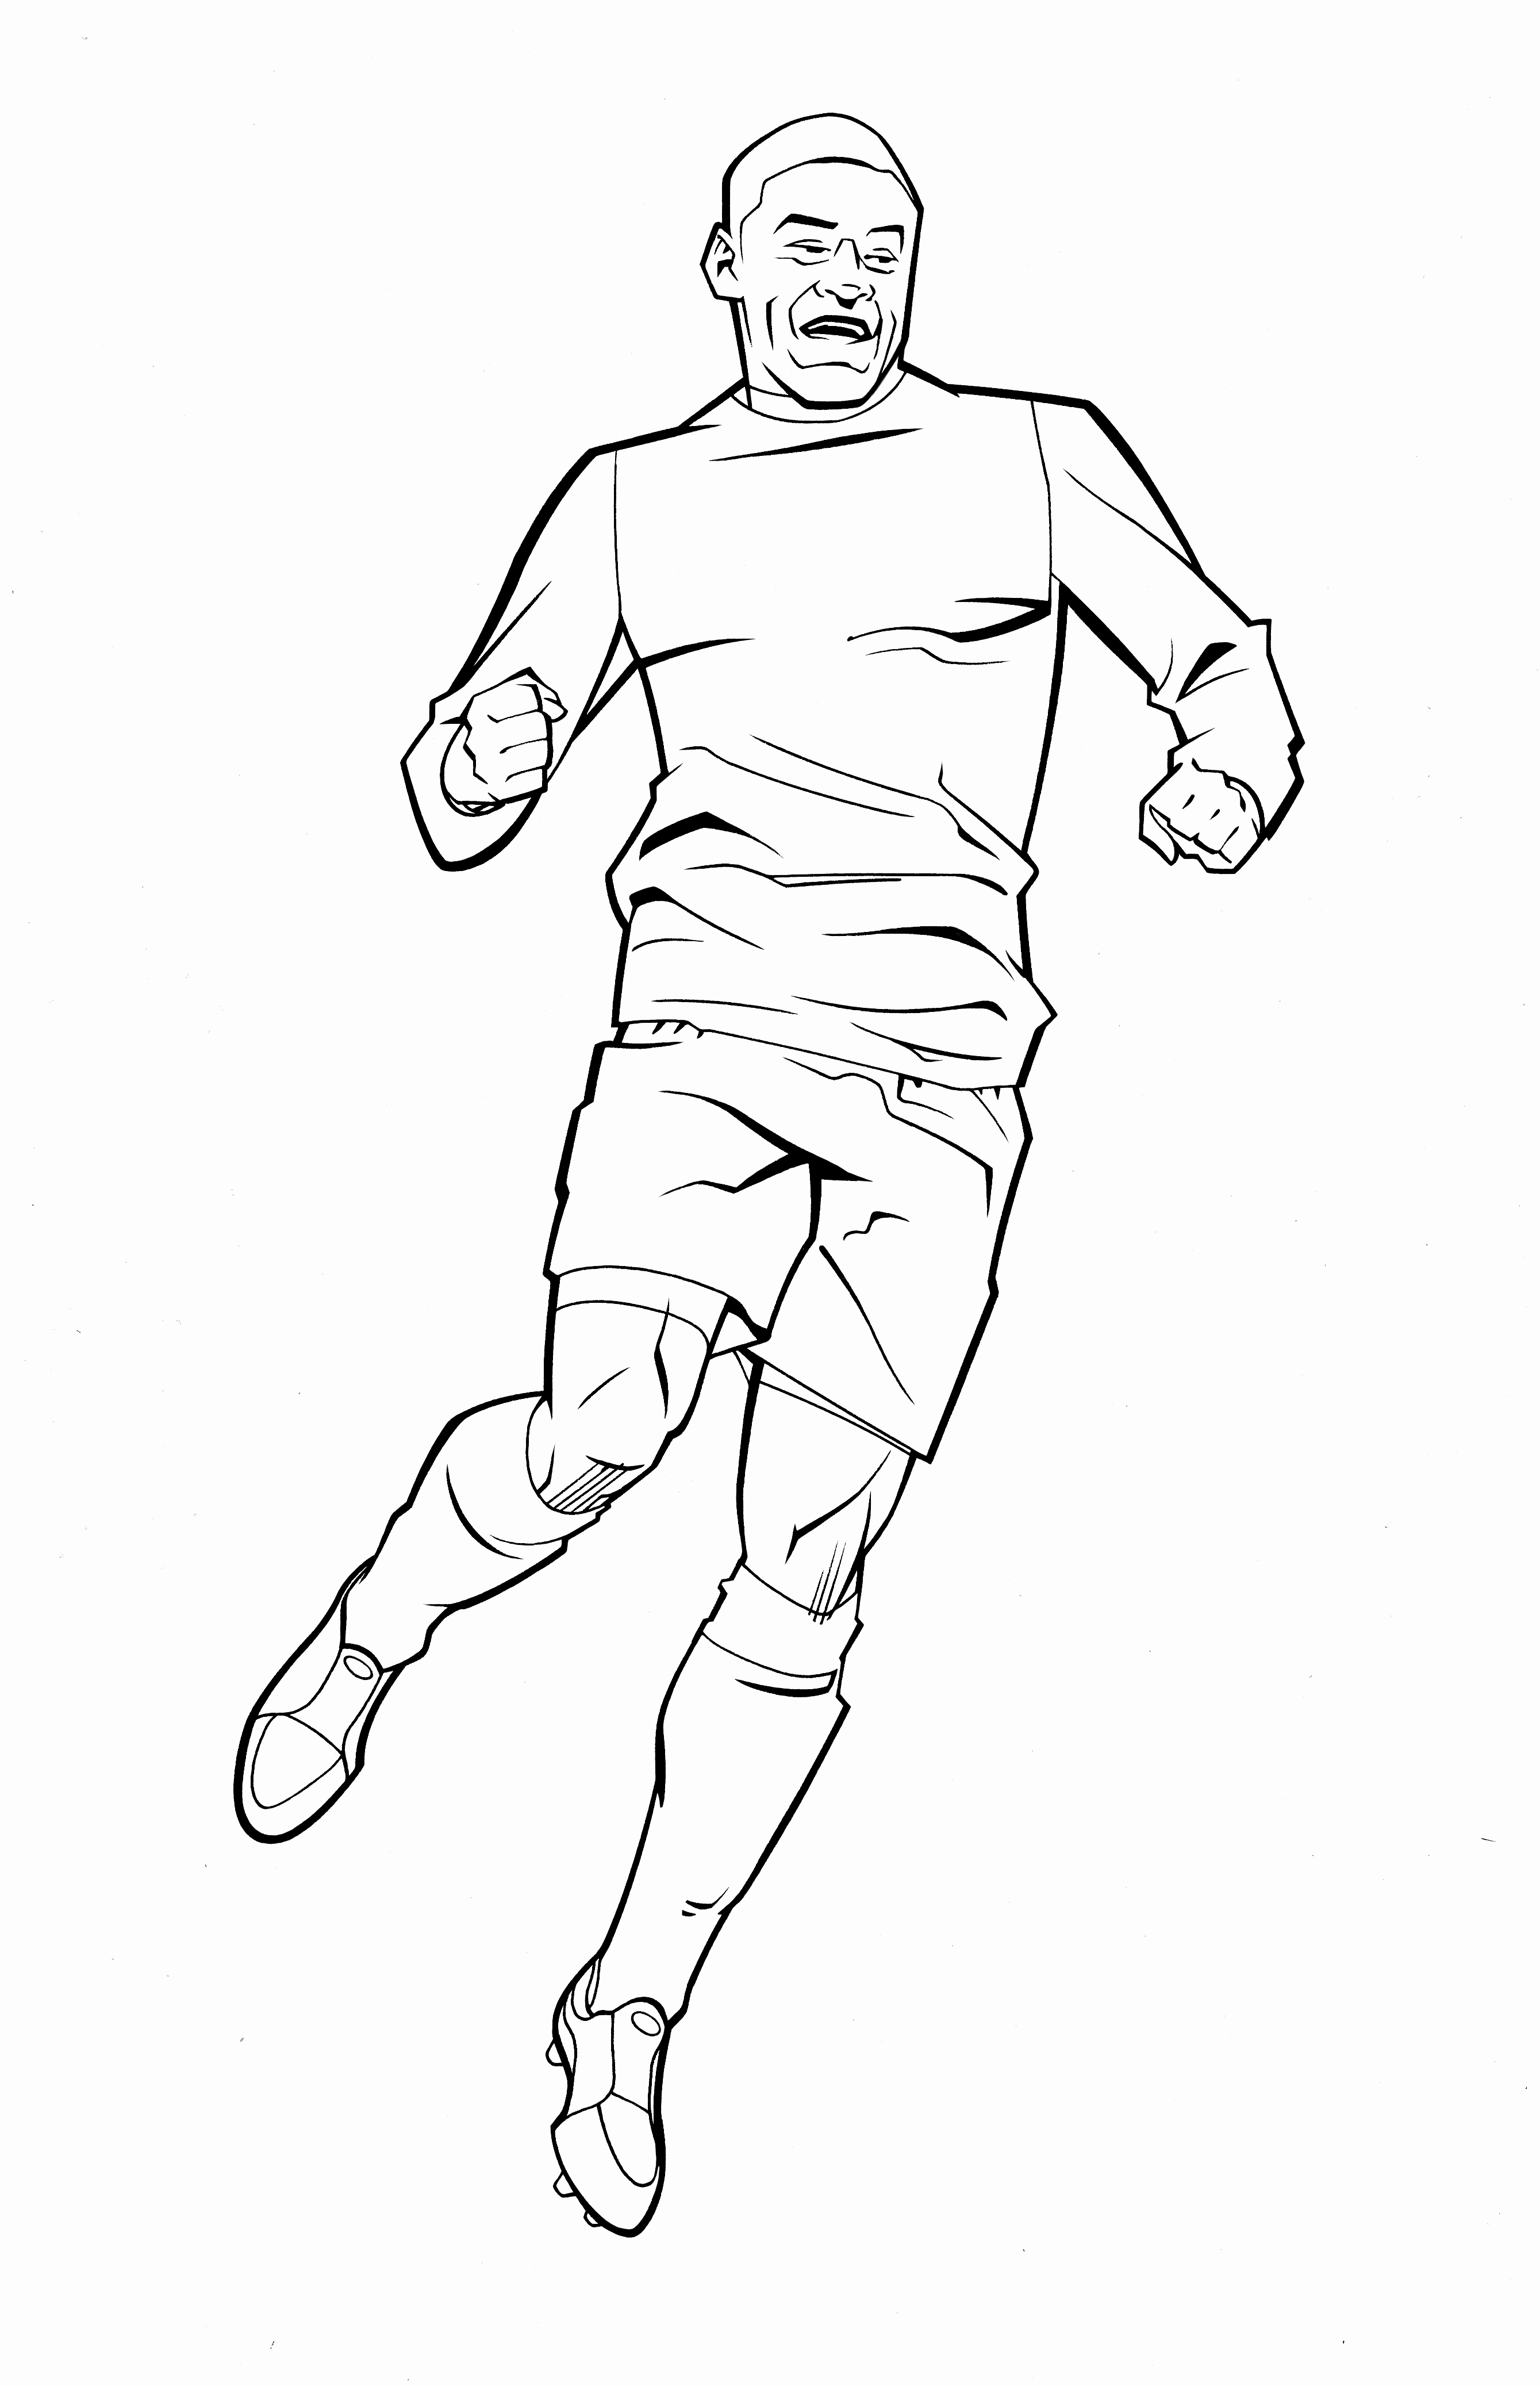 Arsenal Coloring Pages at GetColorings.com | Free printable colorings